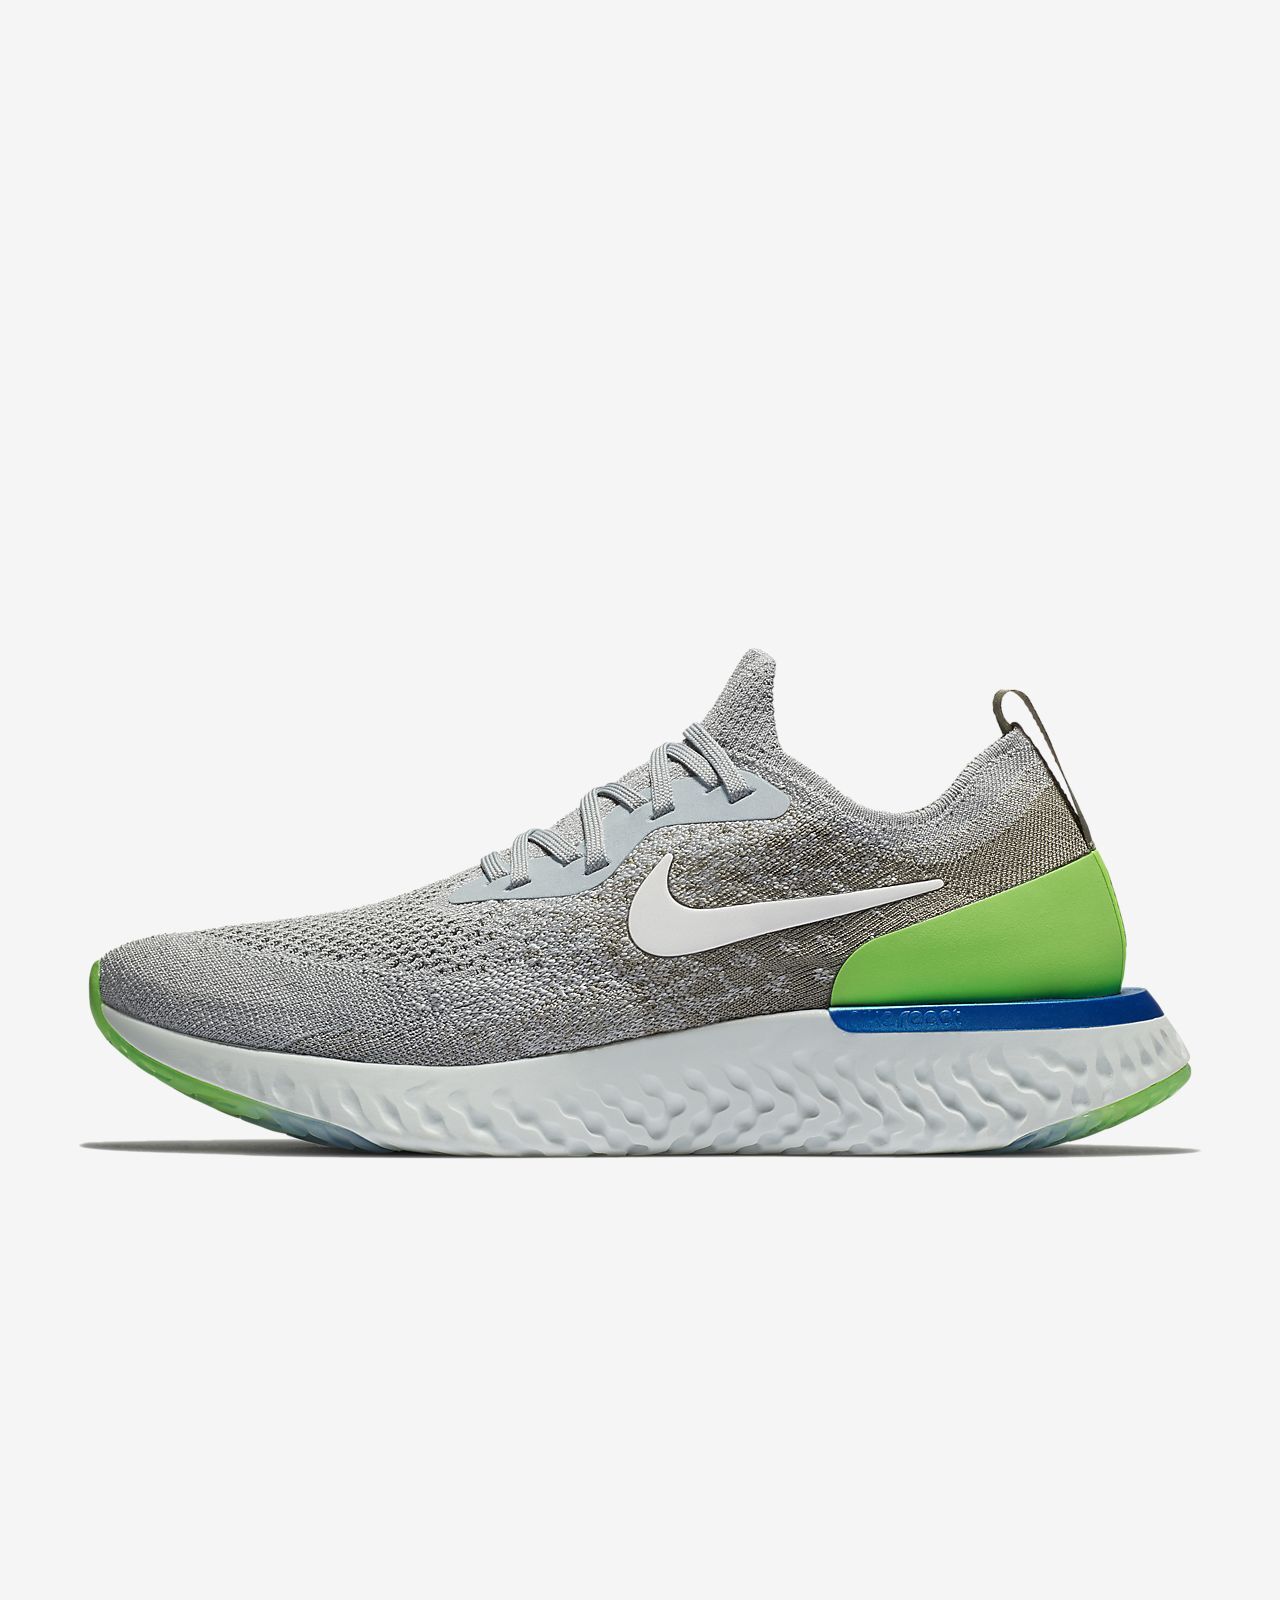 Nike Running Sneakers Unisex in 270083, cheap Other Nike Shoes, only $58!